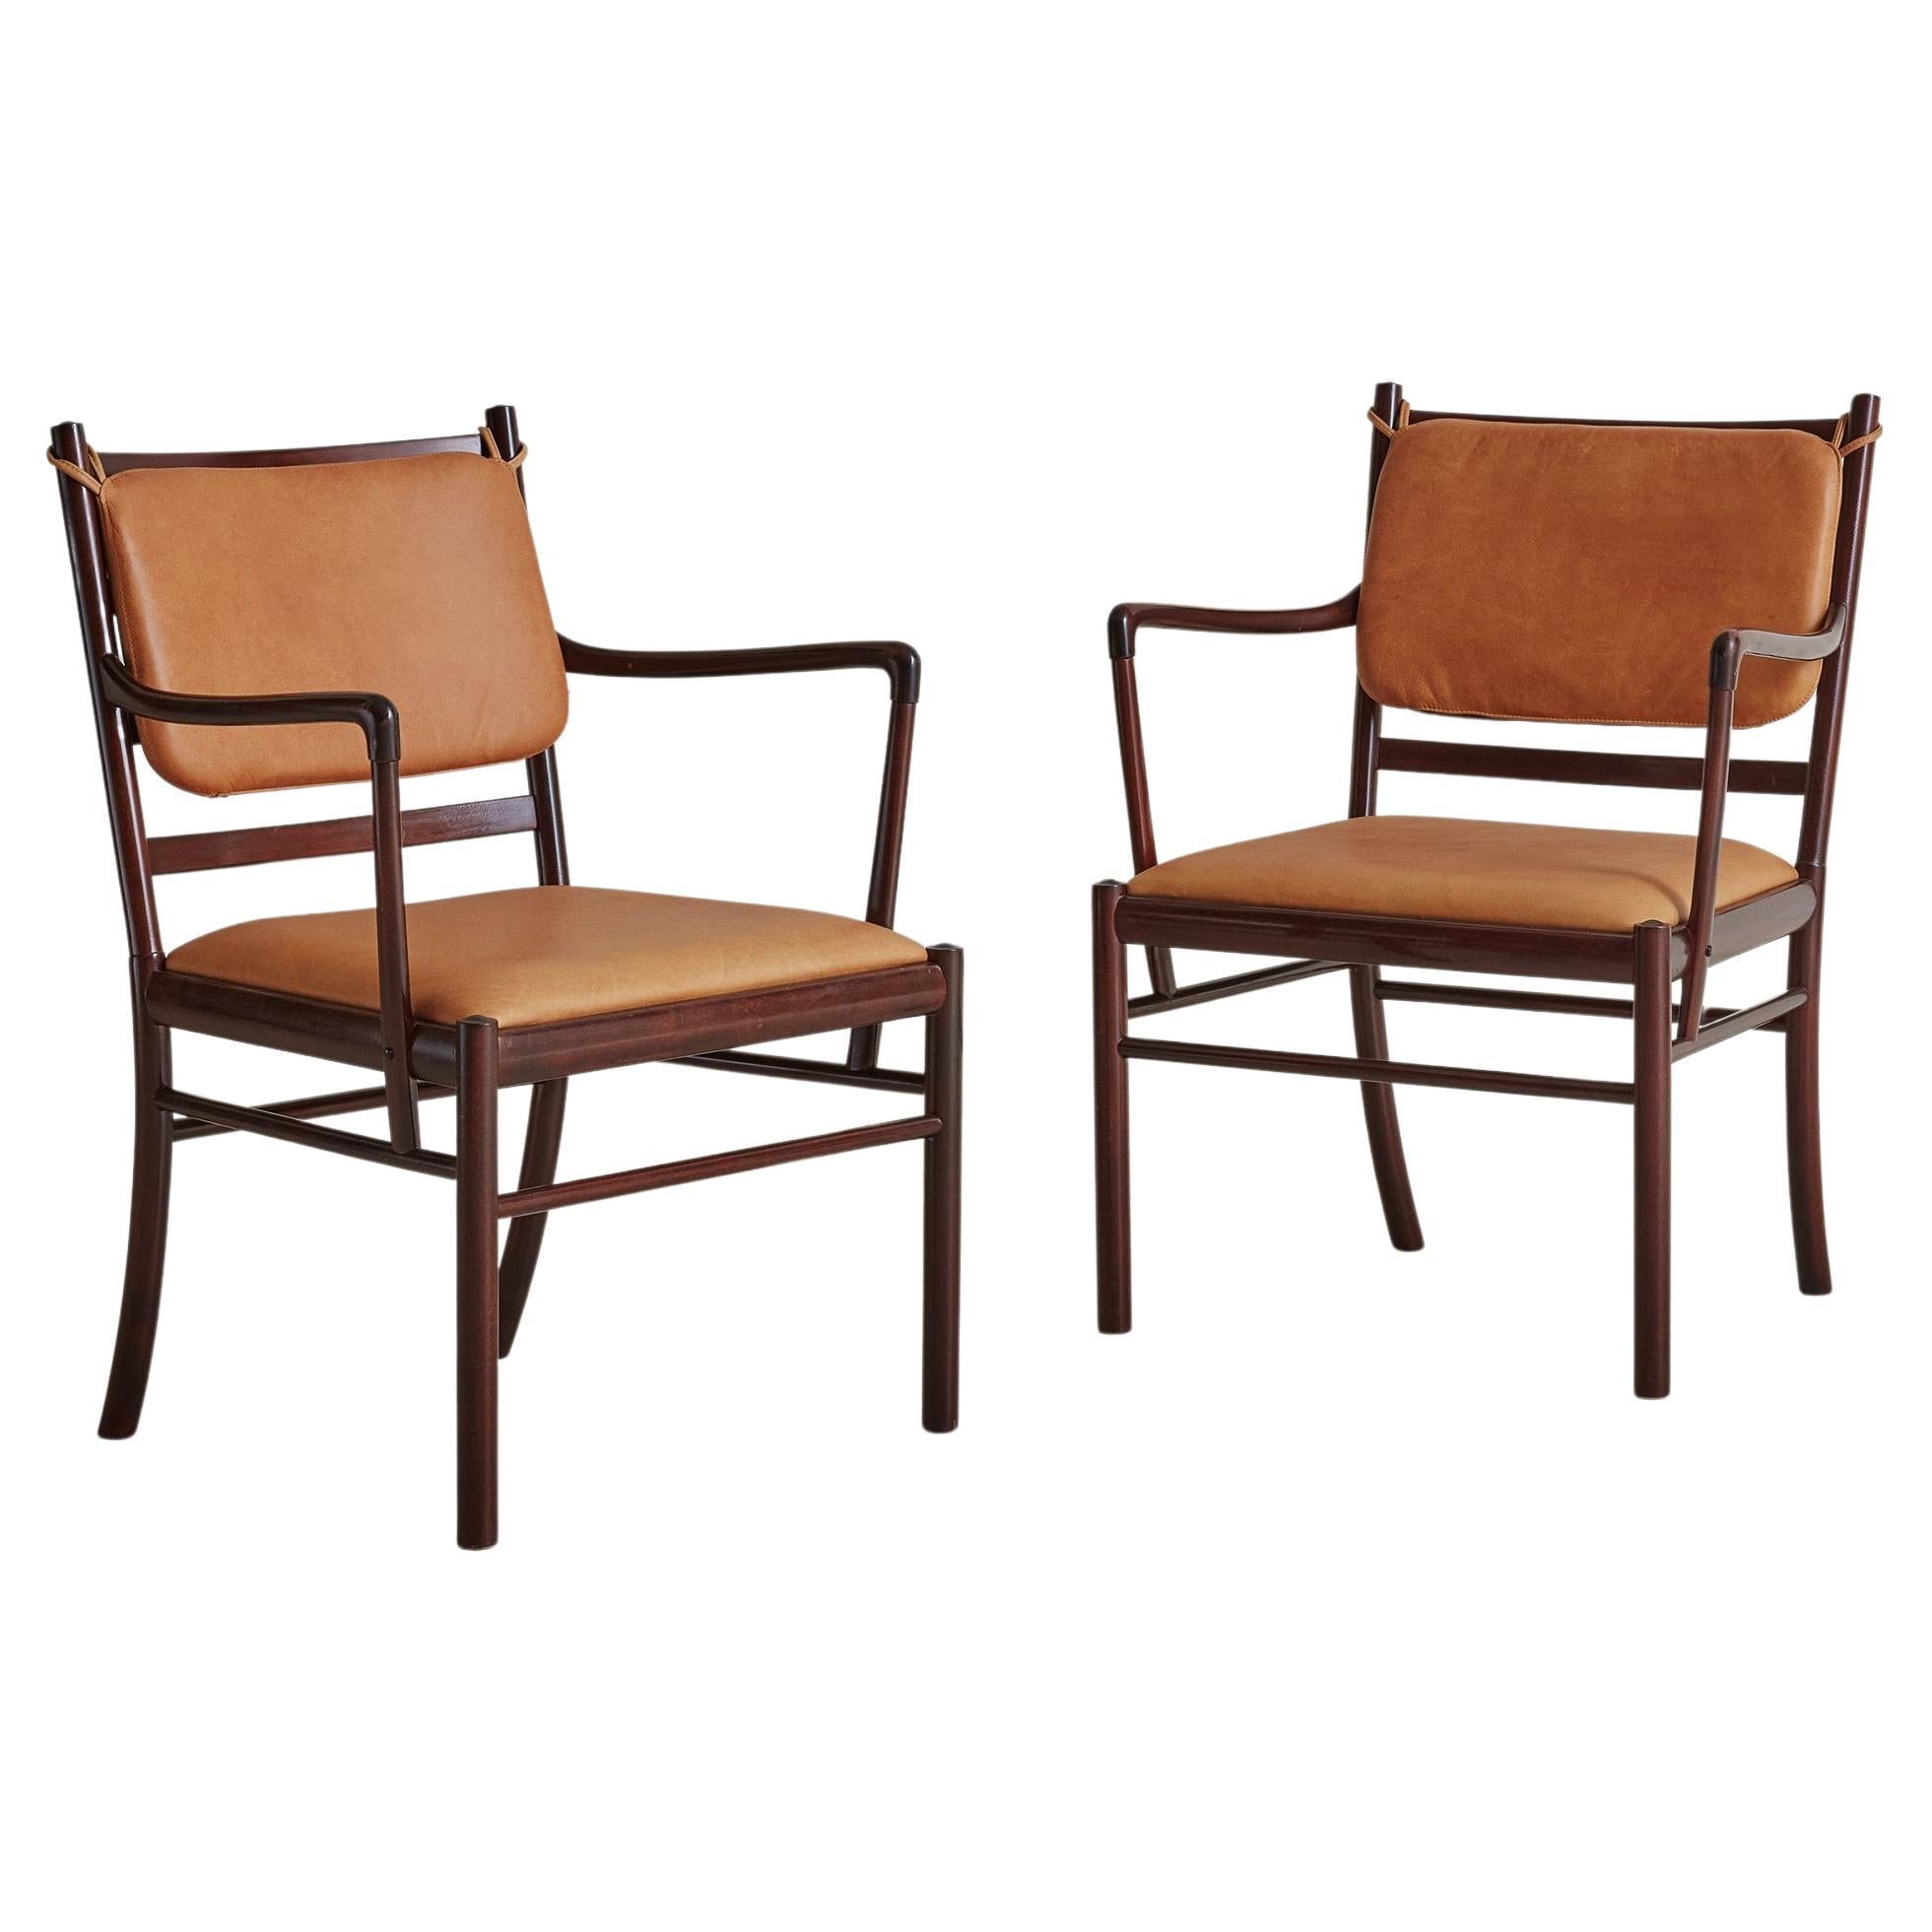 Pair of Wood + Camel Leather 'Colonial' Armchairs by Ole Wanscher, Denmark 1960s For Sale